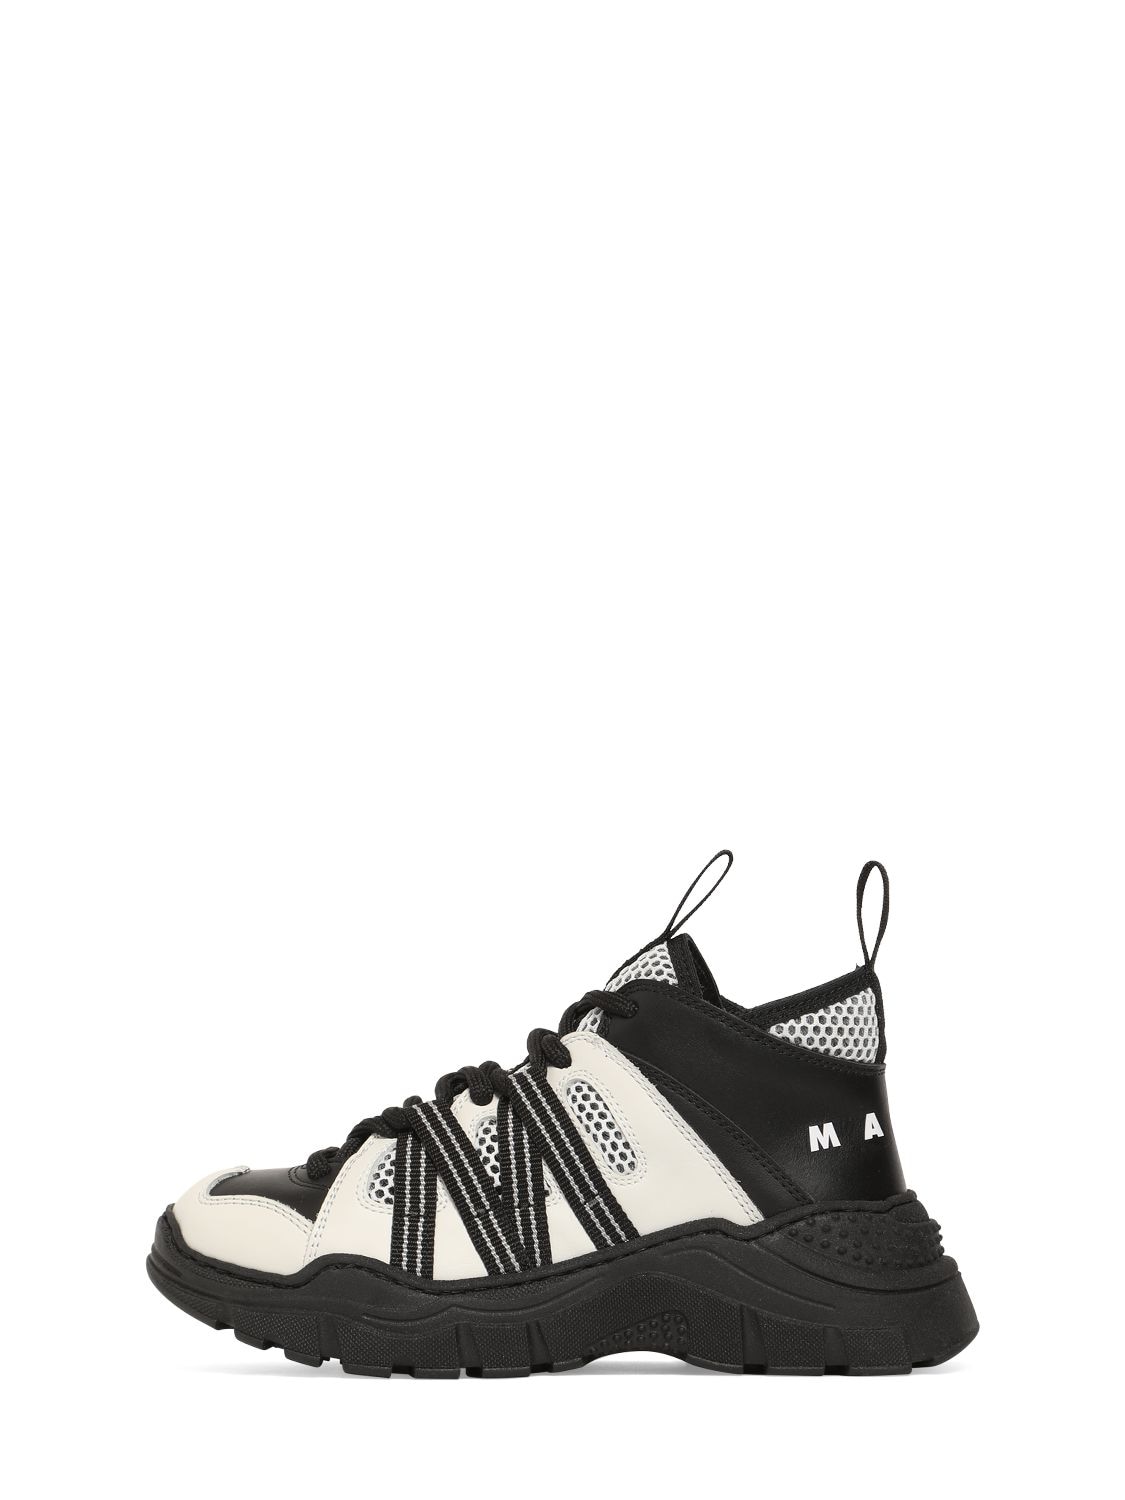 Marni Junior Kids' Nylon & Leather Lace-up Sneakers In Black,white